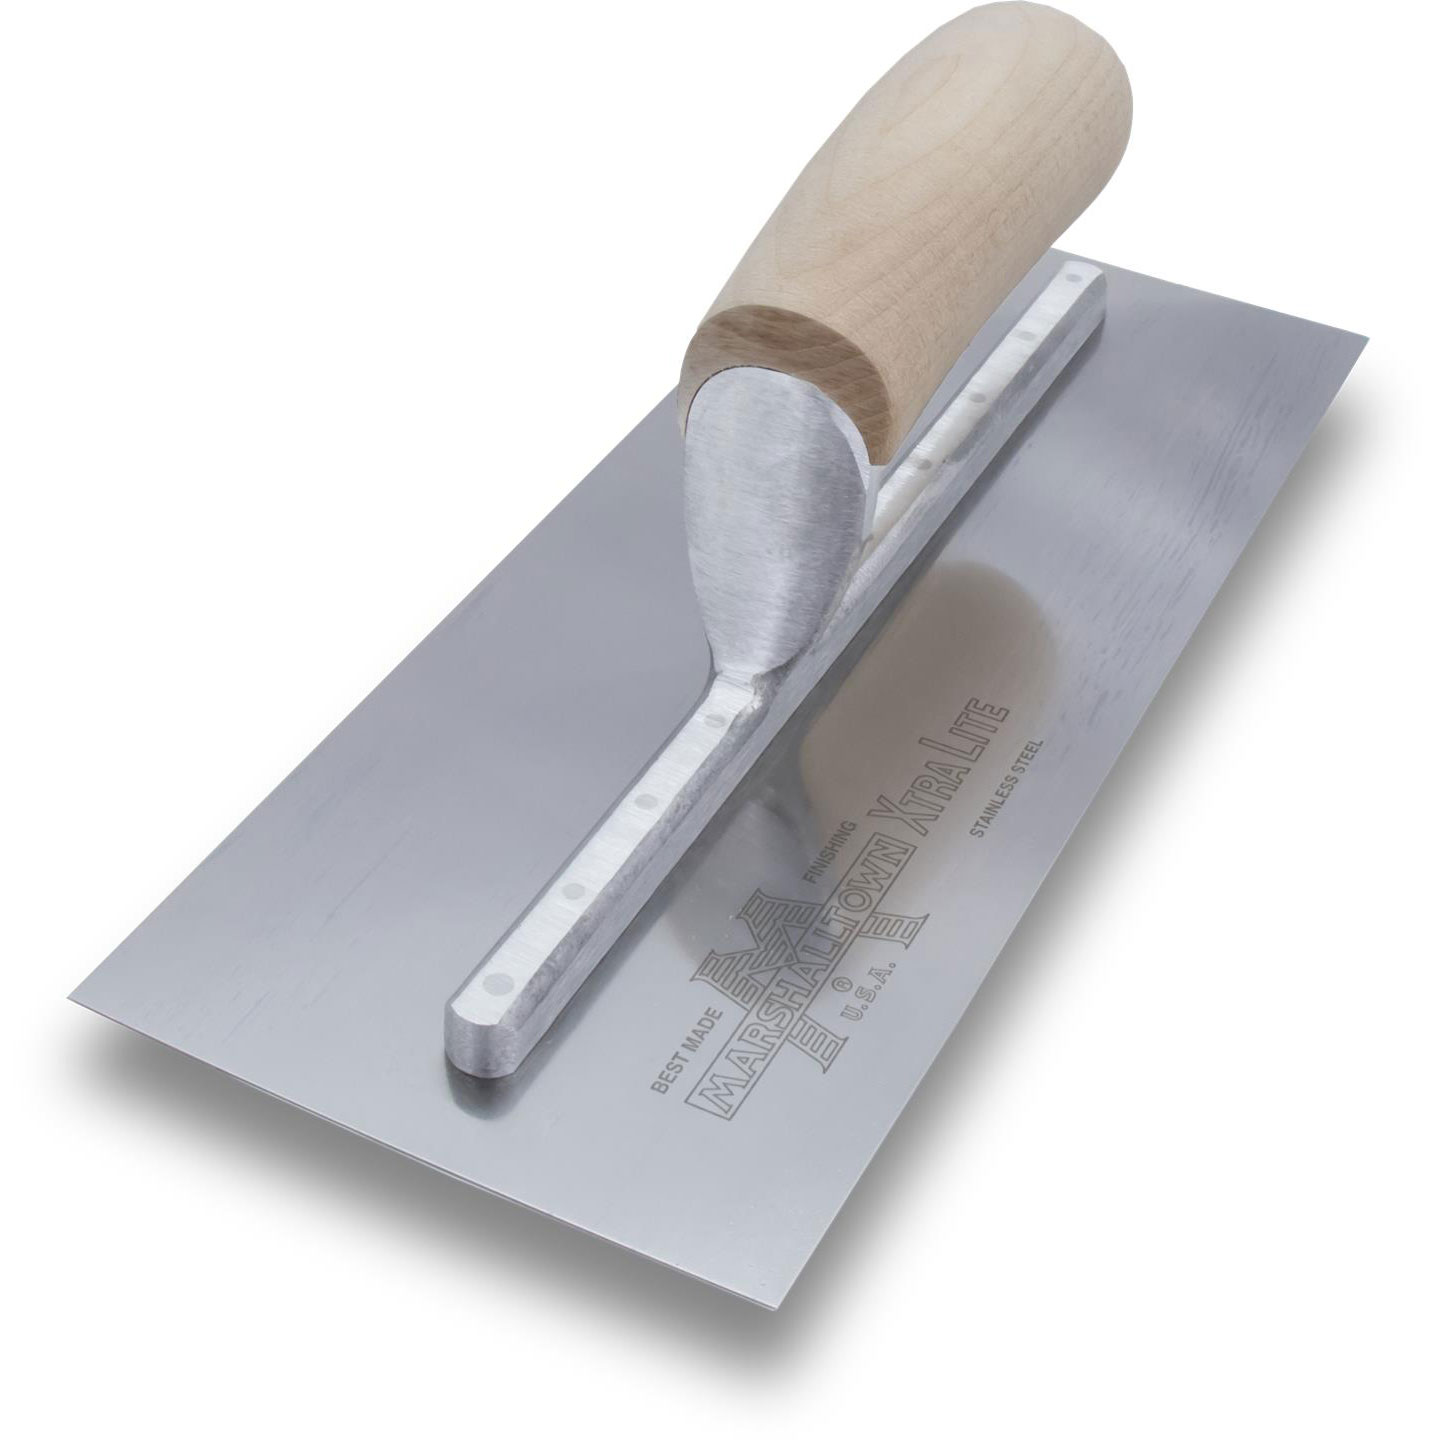 Marshalltown MXS3SS 11in x 4-3/4in Stainless Finishing Trowel with Curved Wood Handle MXS3SS